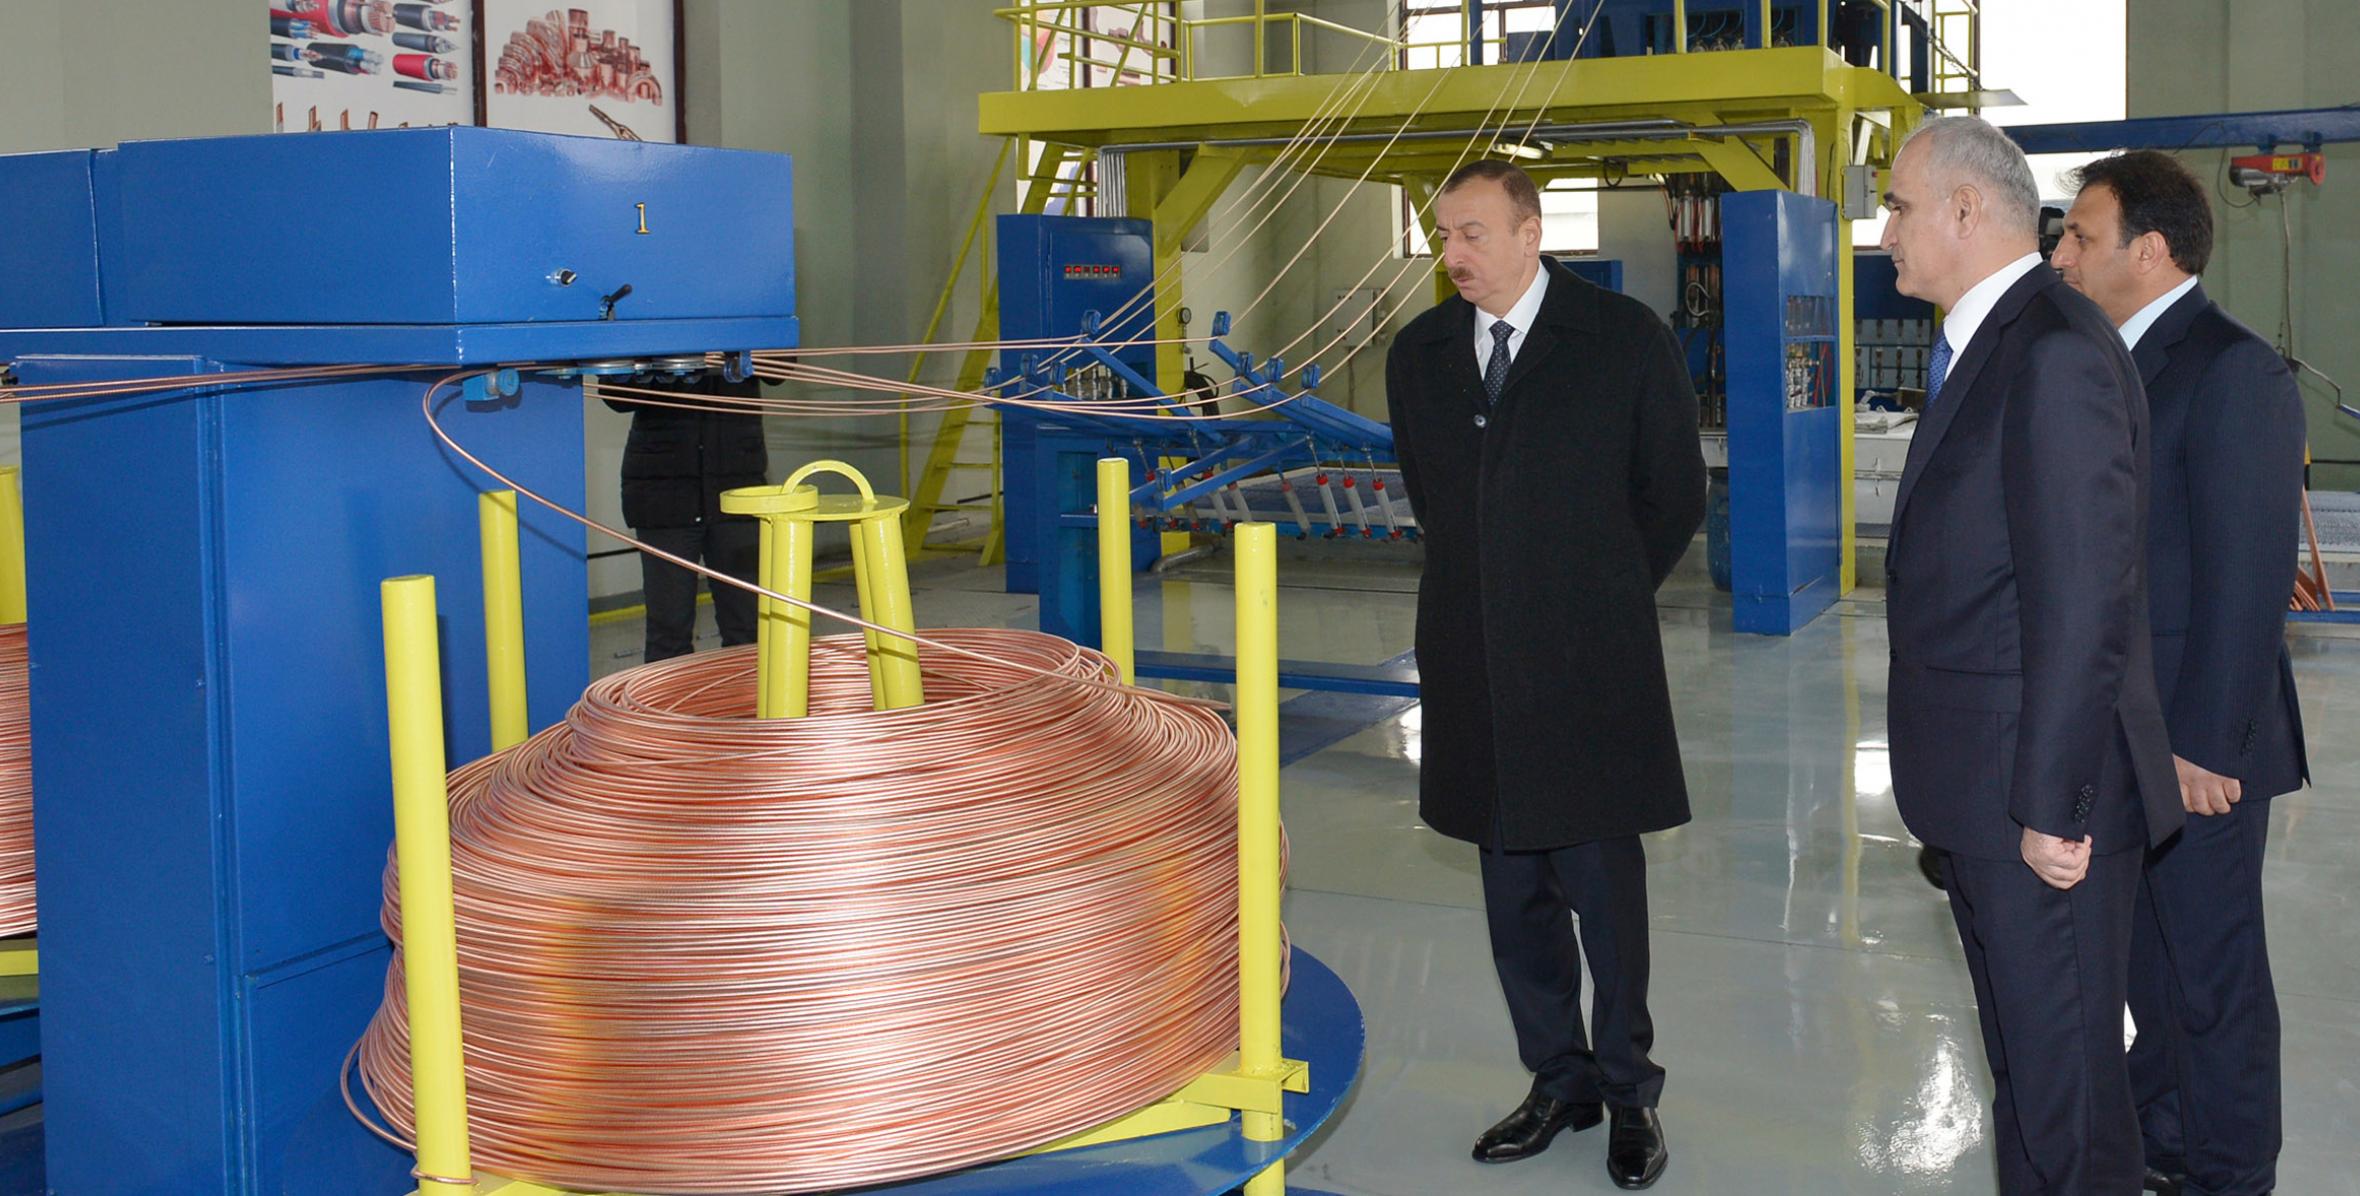 Ilham Aliyev attended the opening of a copper processing plant